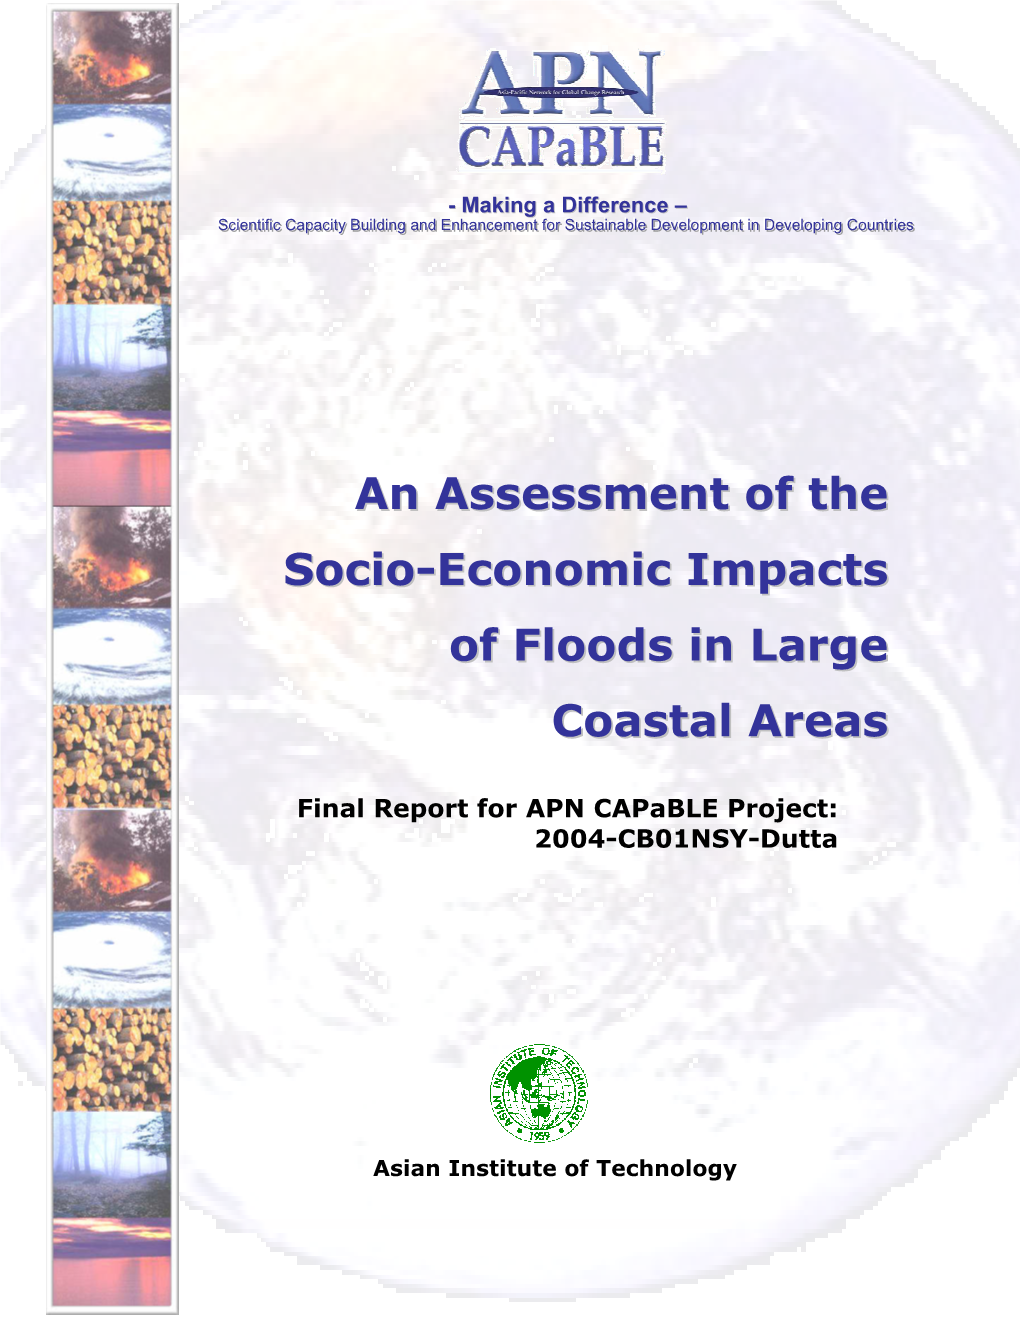 An Assessment of the Socio-Economic Impacts of Floods in Large Coastal Areas